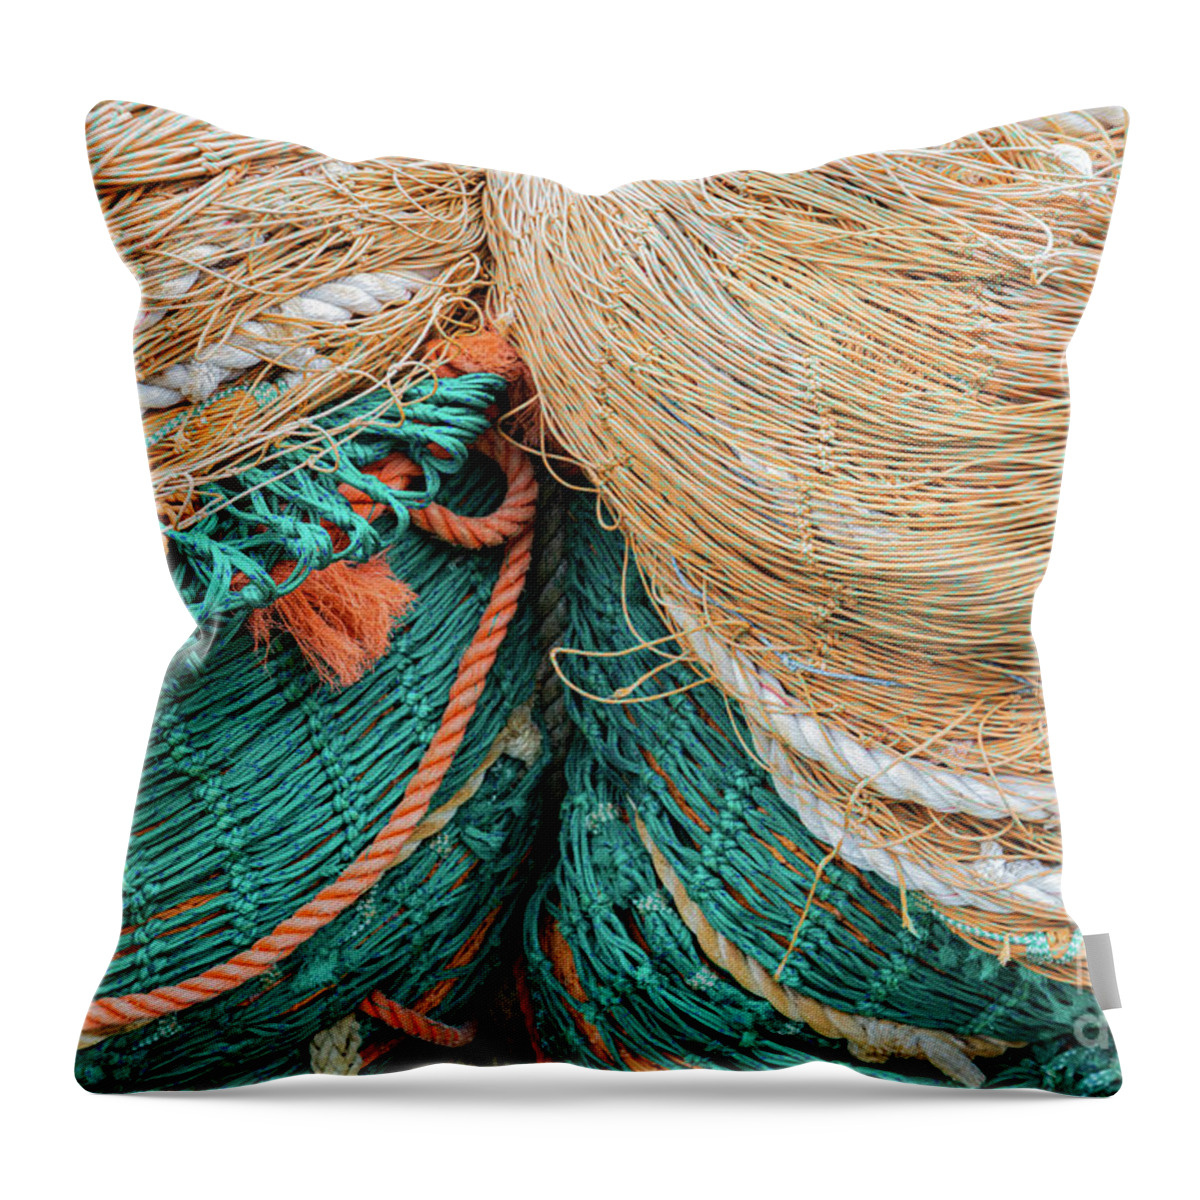 Fishing Nets Throw Pillow featuring the photograph Colorful Fishing Nets by Eva Lechner